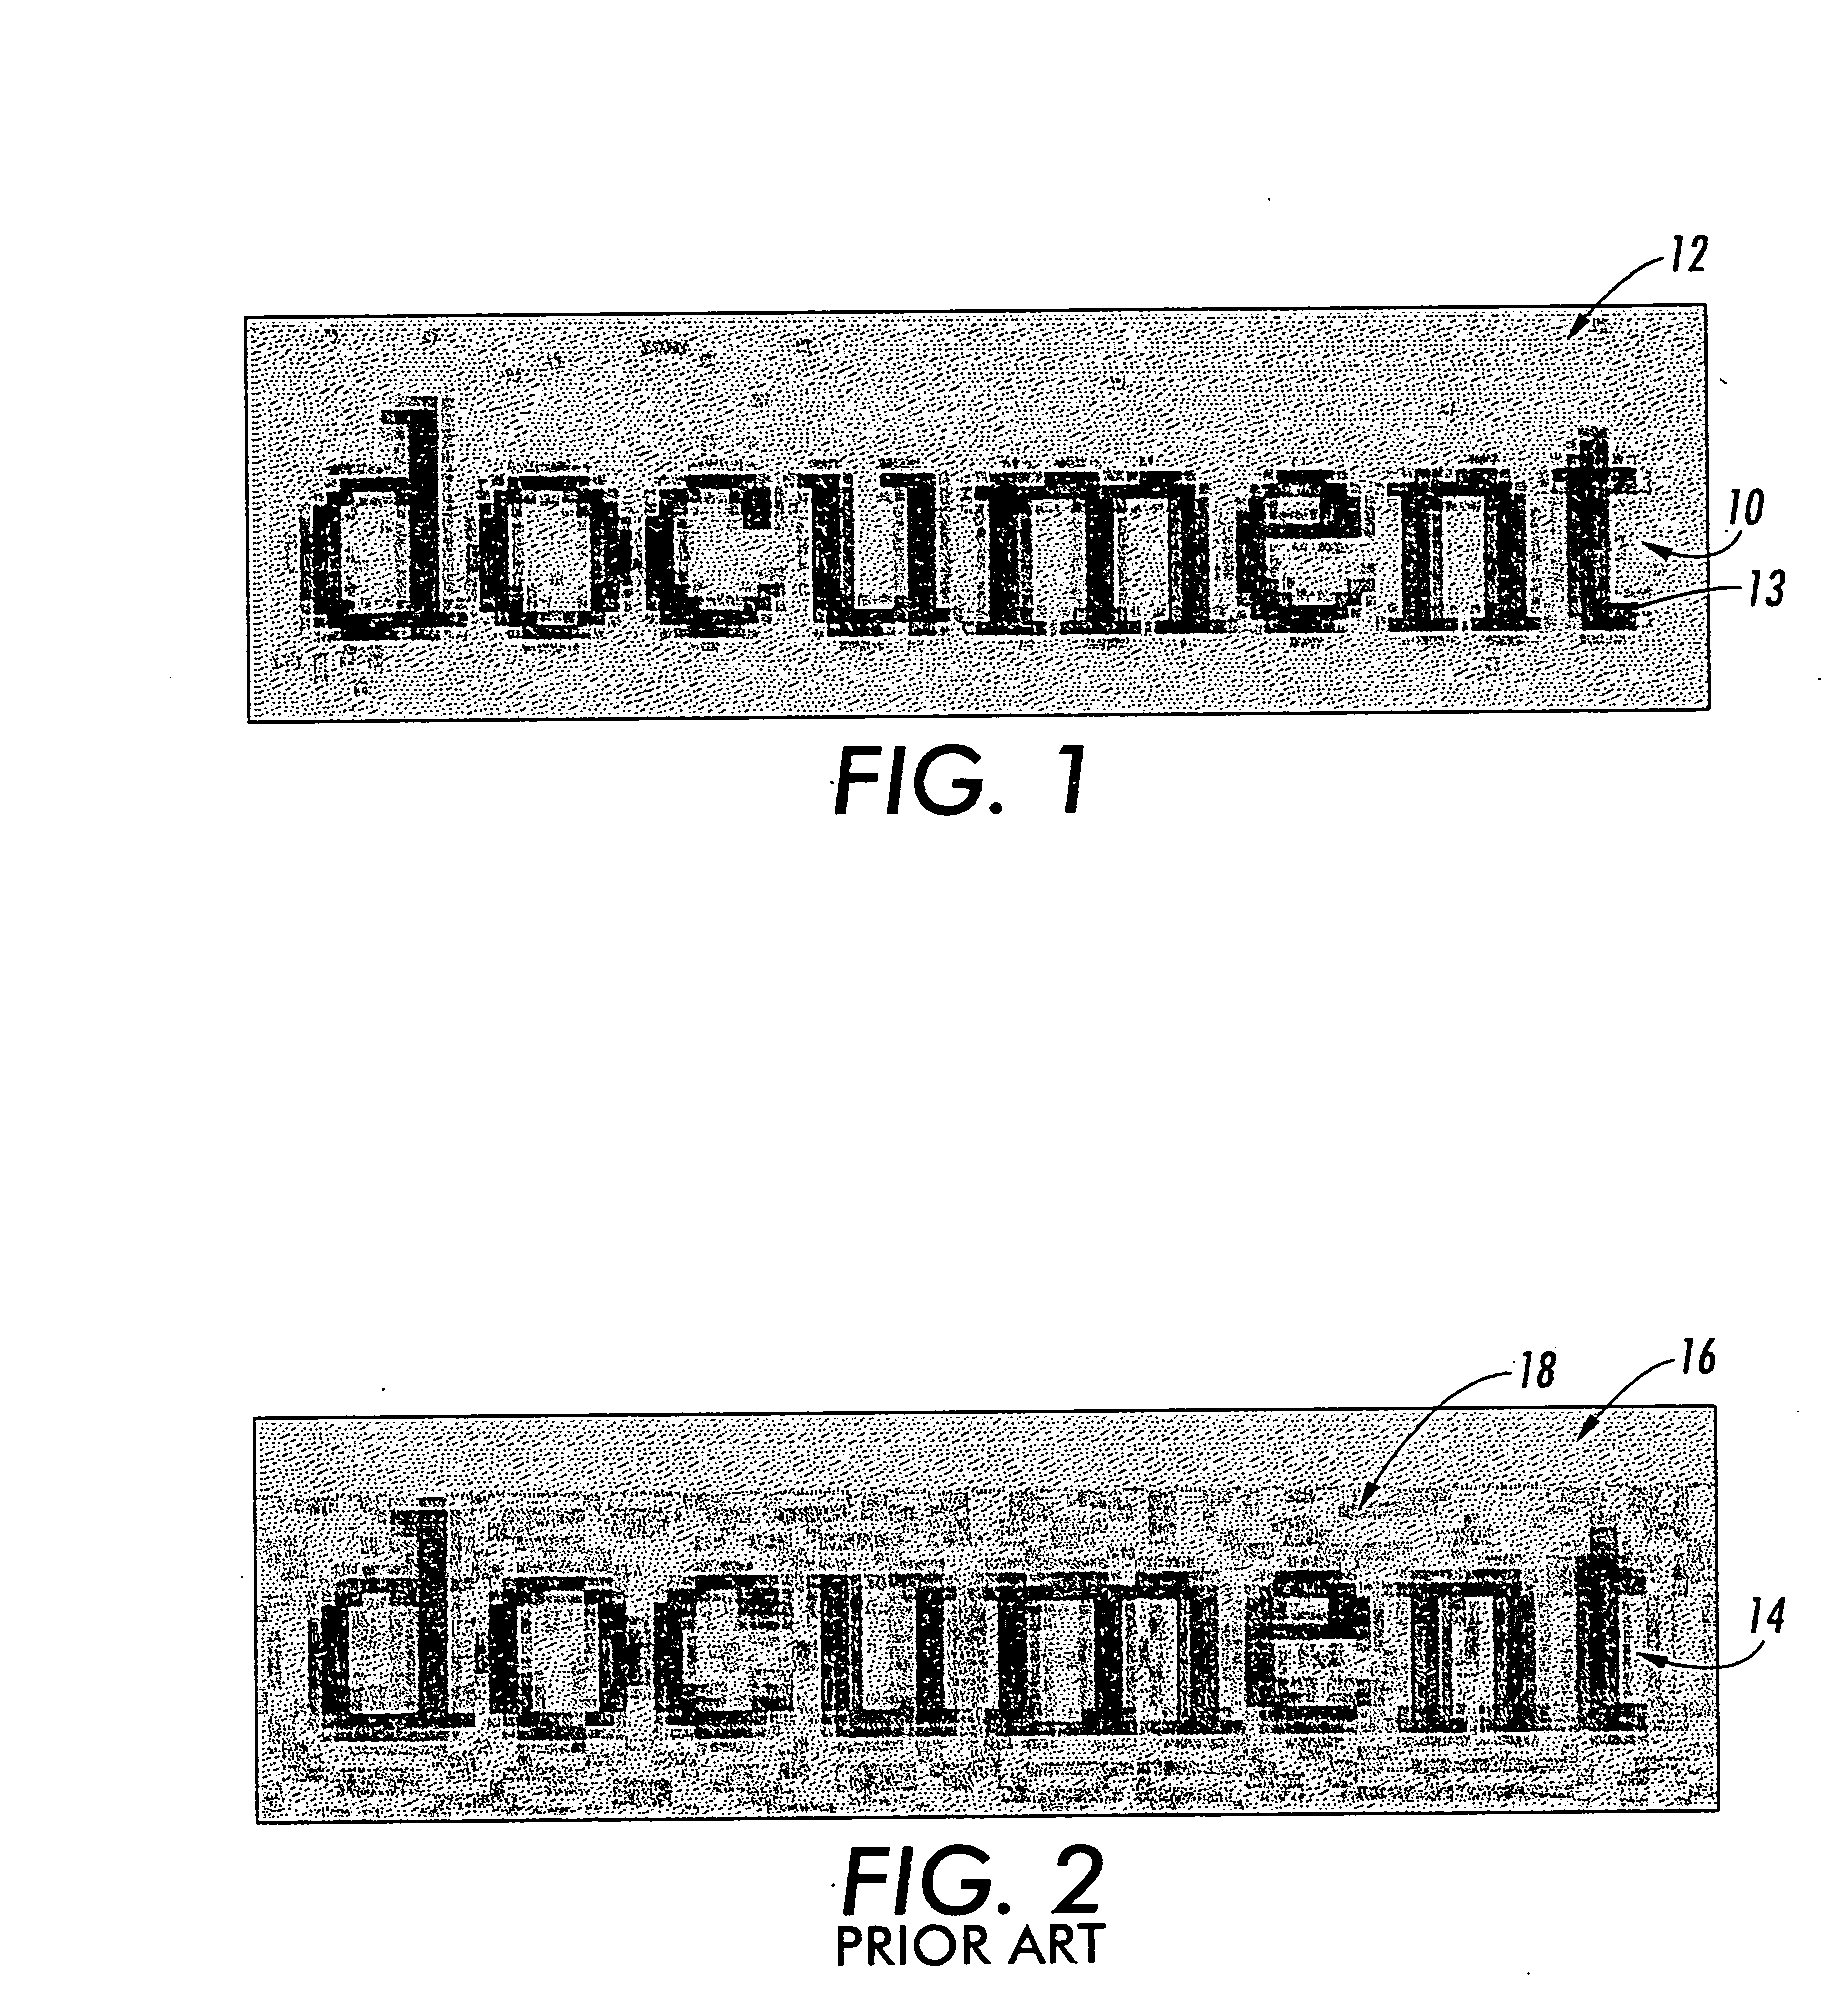 Removing ringing and blocking artifacts from JPEG compressed document images